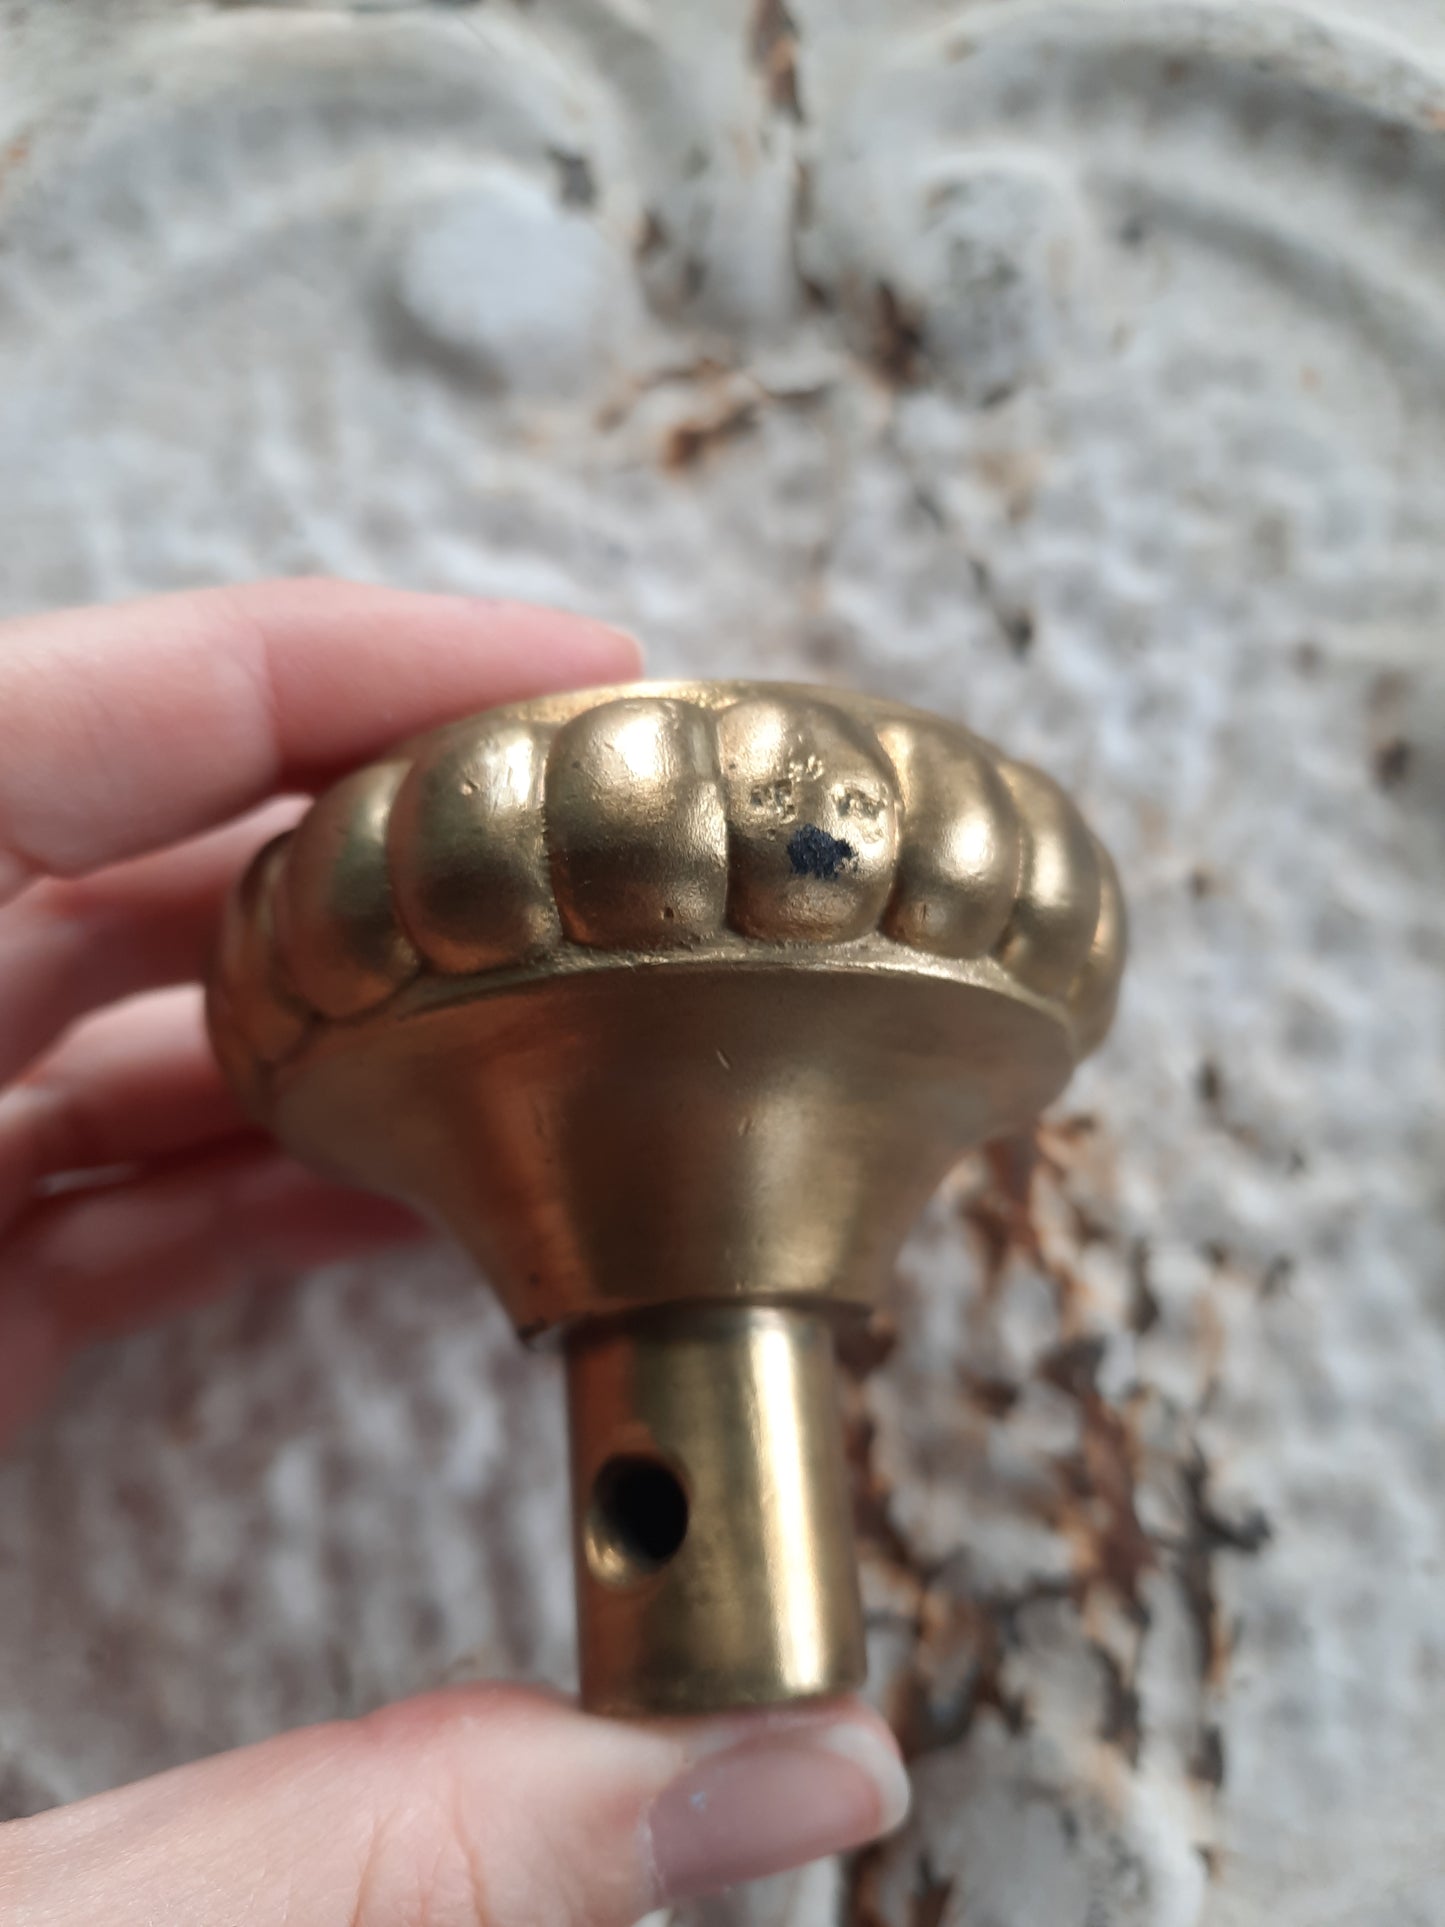 Entry Sized "Marsala" Doorknob by Reading, Large Solid Bronze Antique Entry Doorknob